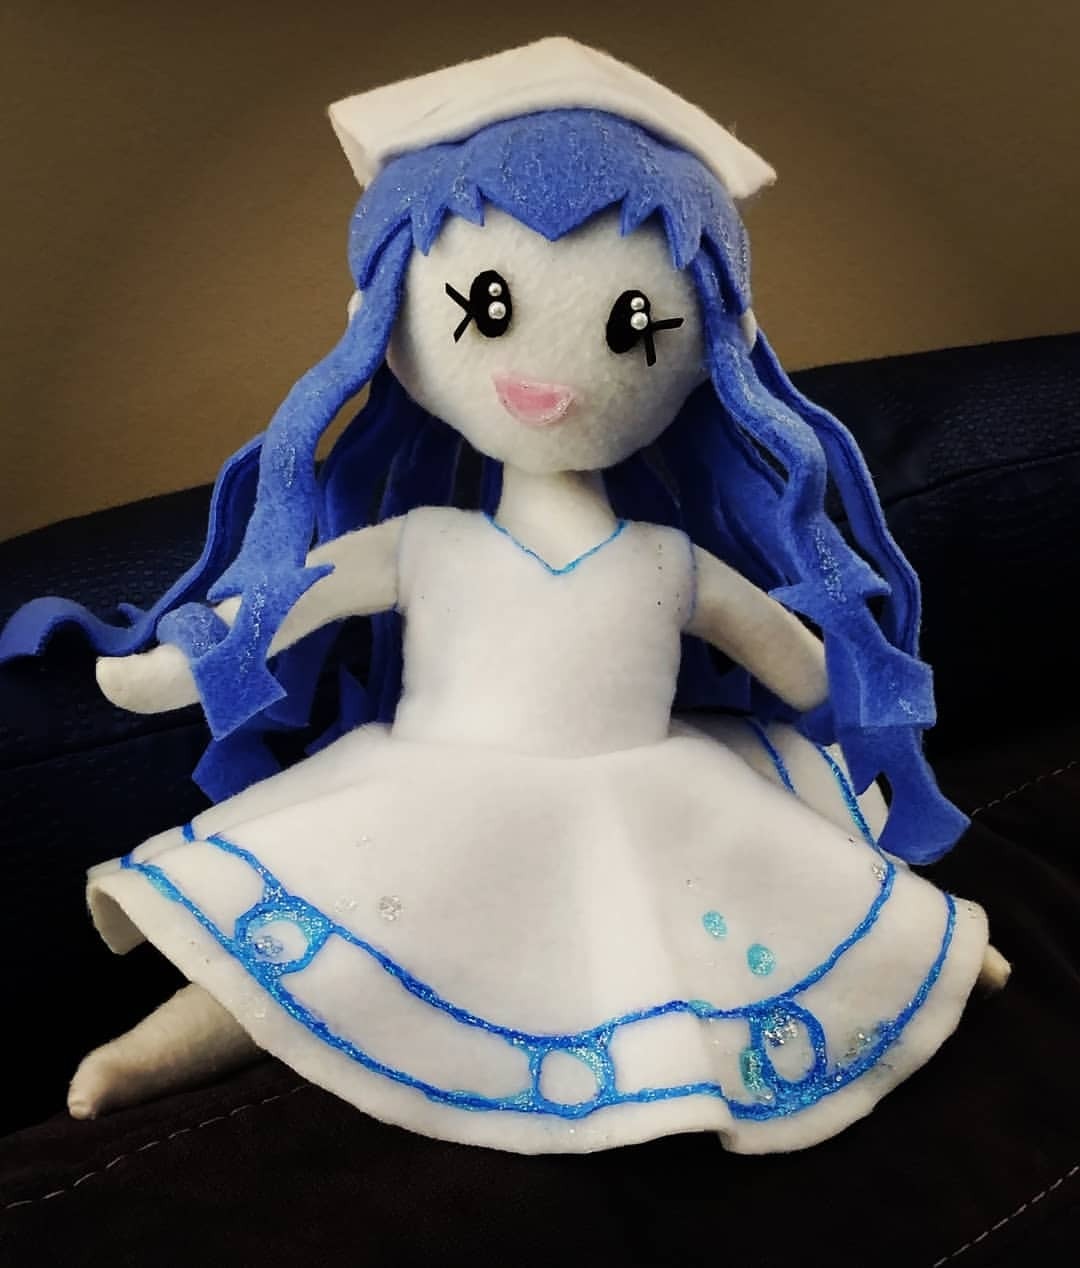 Elentari Cosplay — My Squid Girl obsession has reached plushie level!...